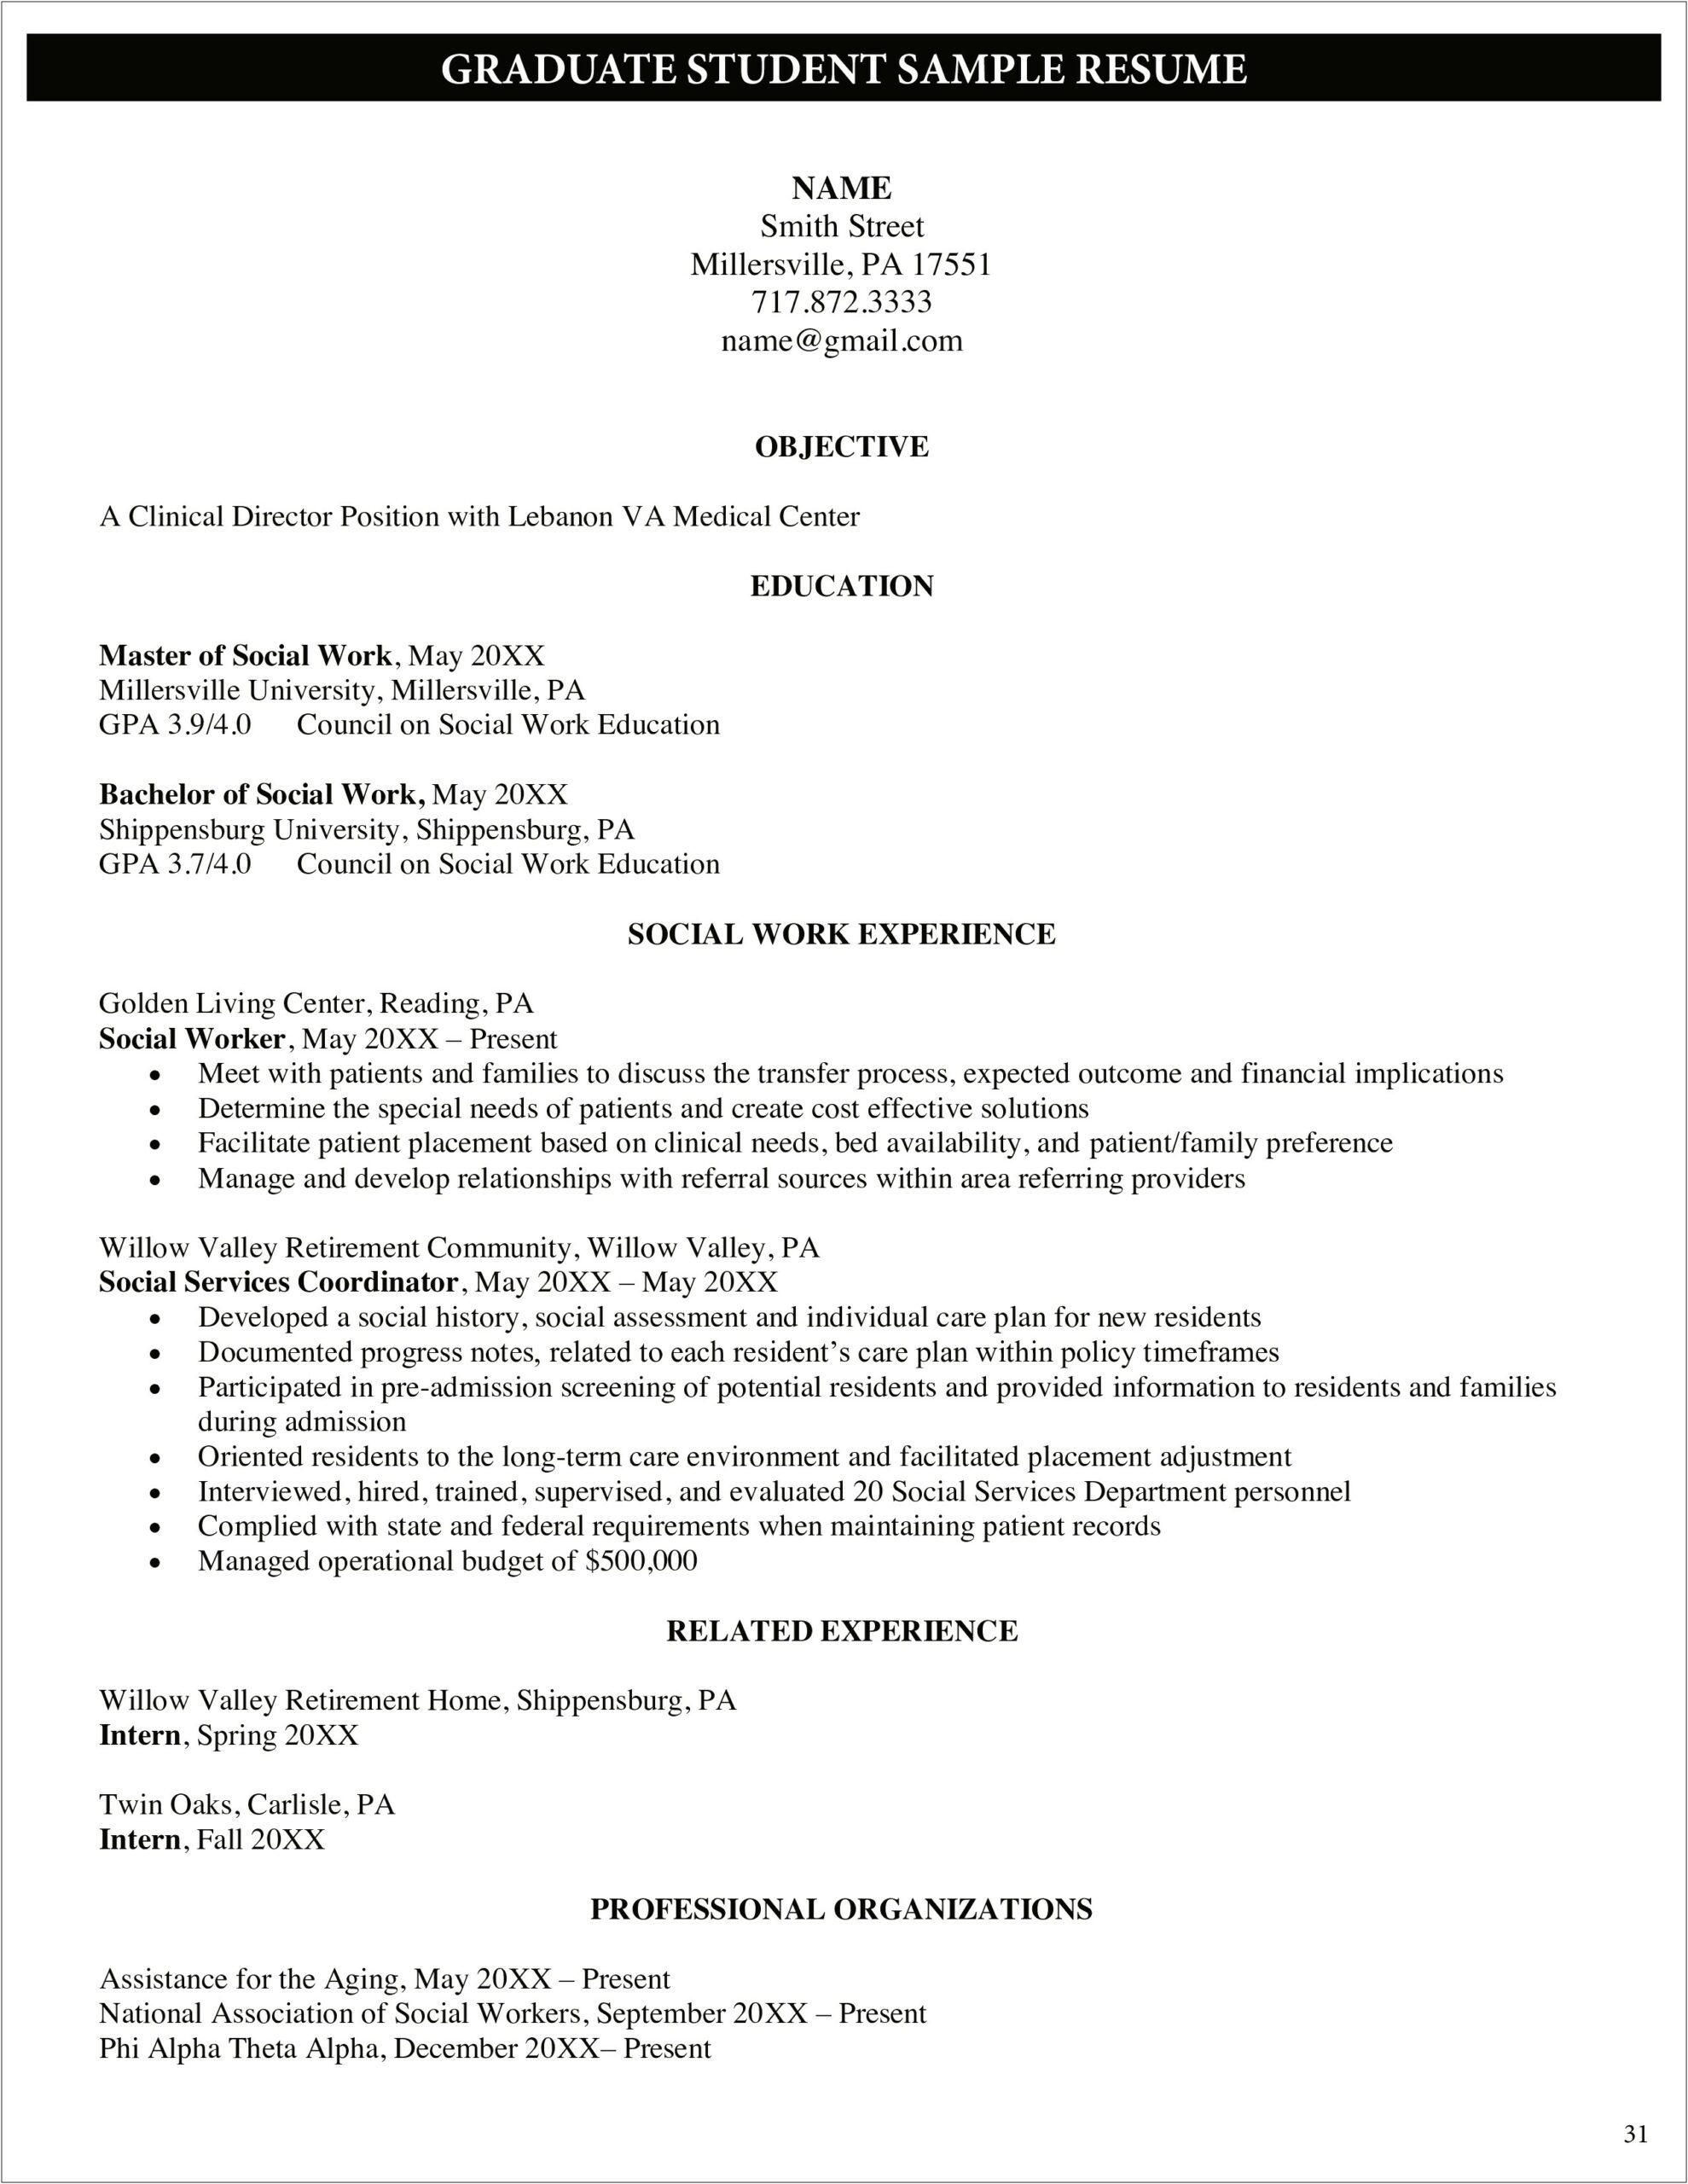 Resume Objective For Social Worker Examples